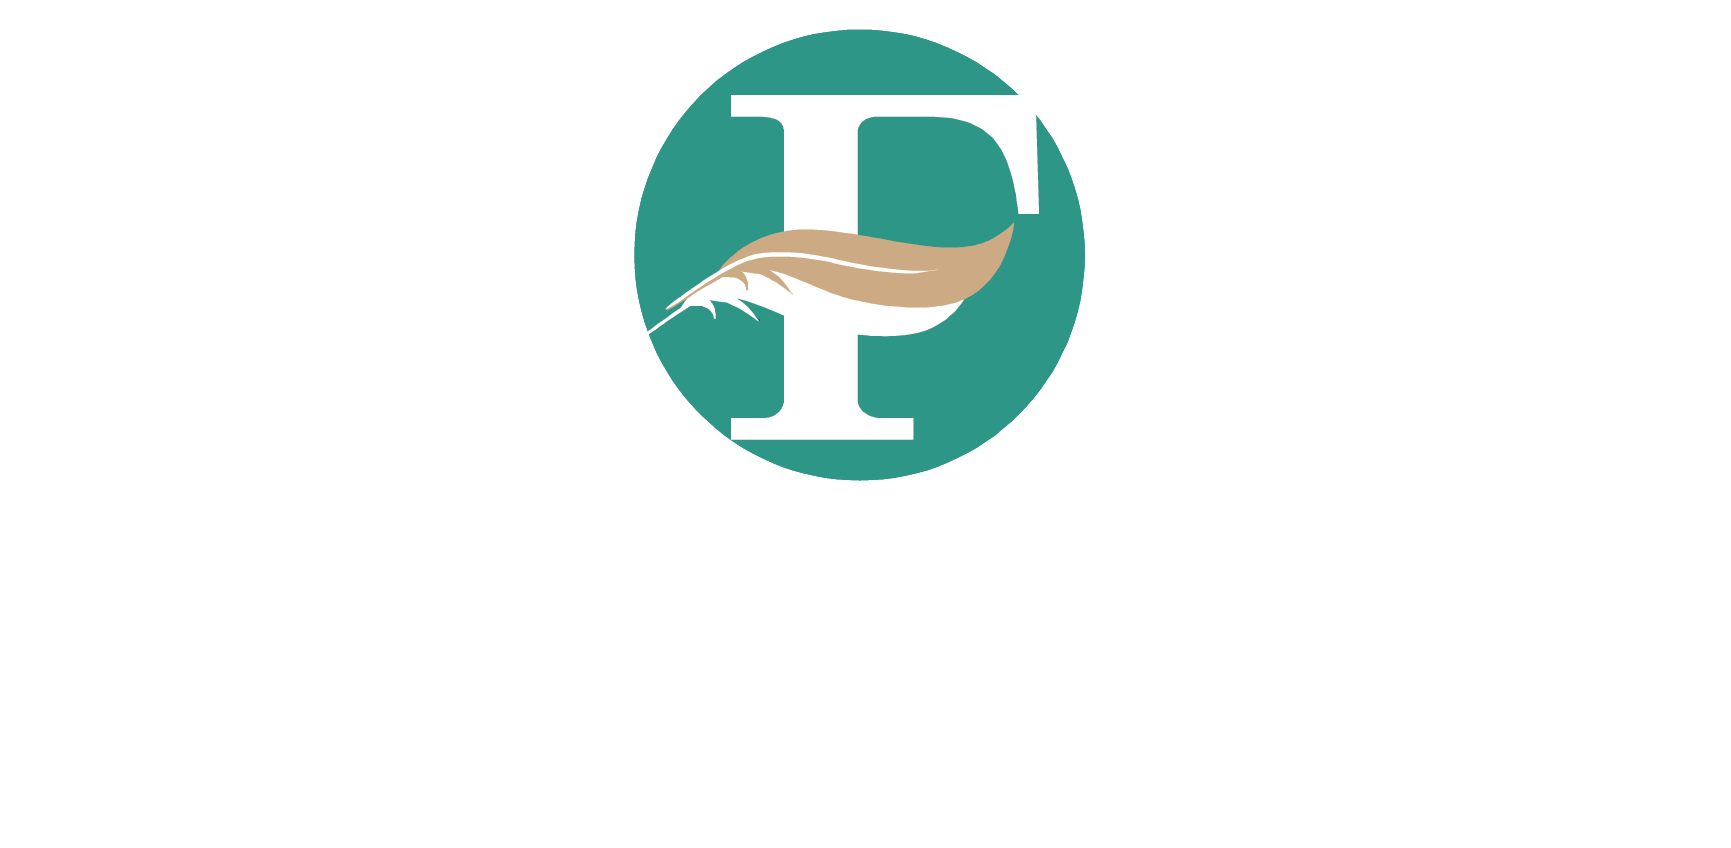 feather river casino events